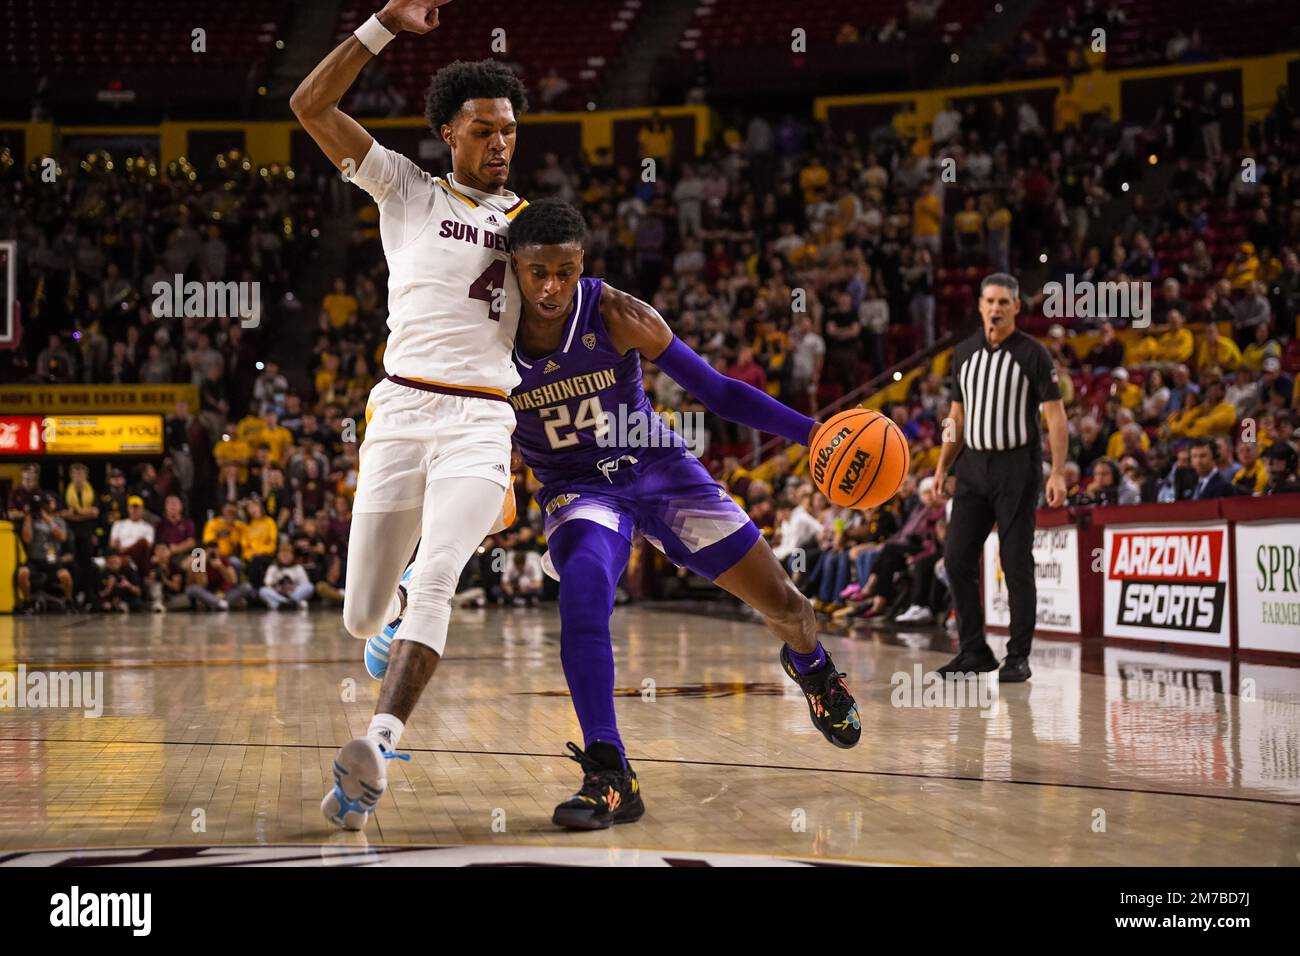 University of Washington guard Noah Williams (24) goes one-on-one with Arizona State guard Desmond Cambridge Jr (4) in the first half of the NCAA bask Stock Photo